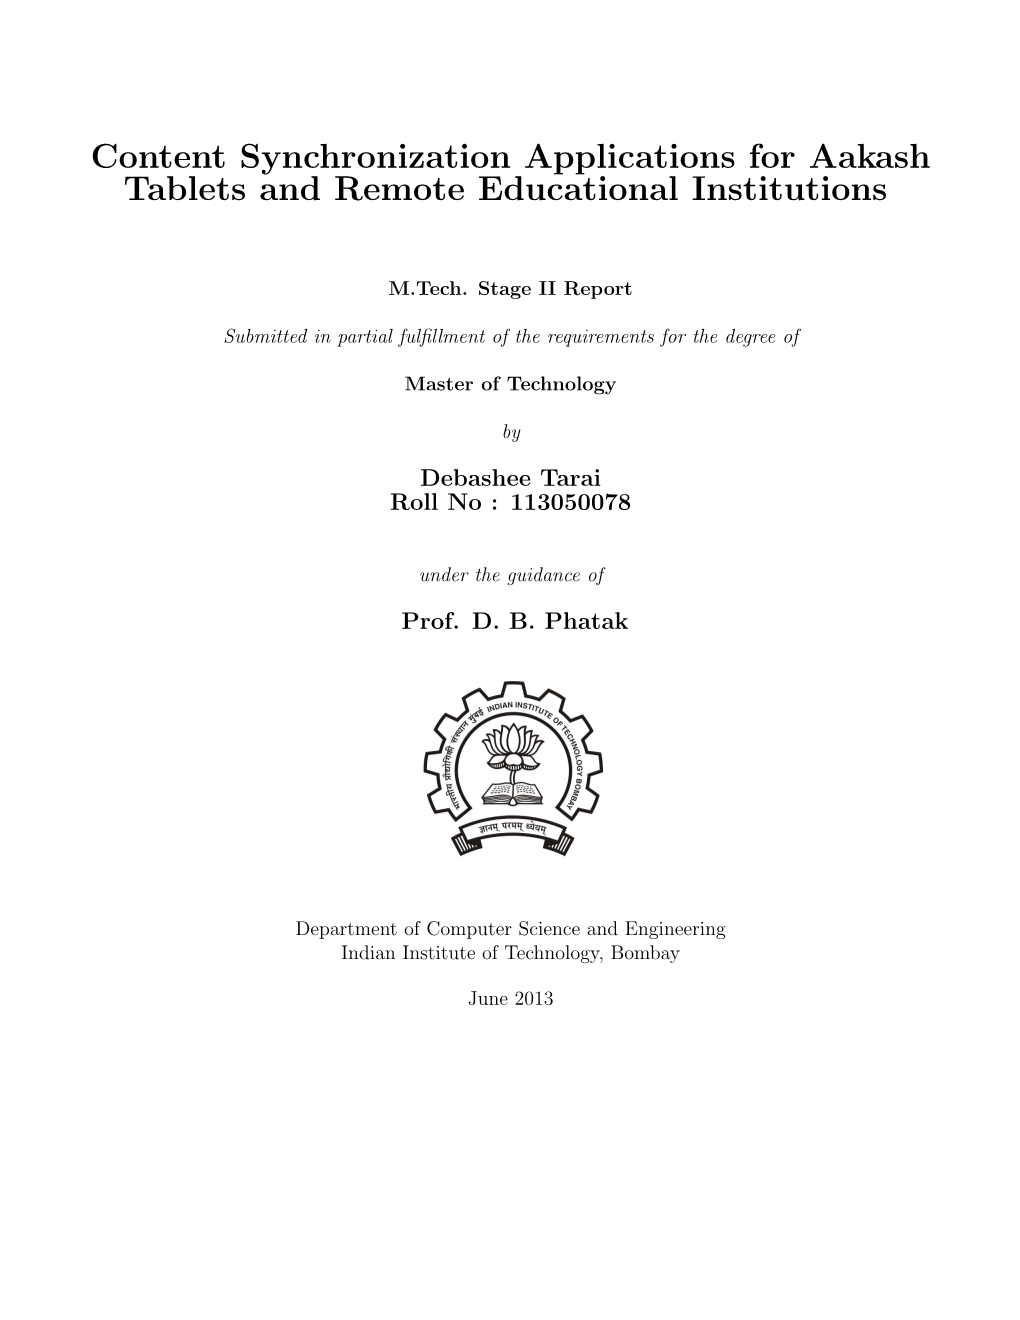 Content Synchronization Applications for Aakash Tablets and Remote Educational Institutions